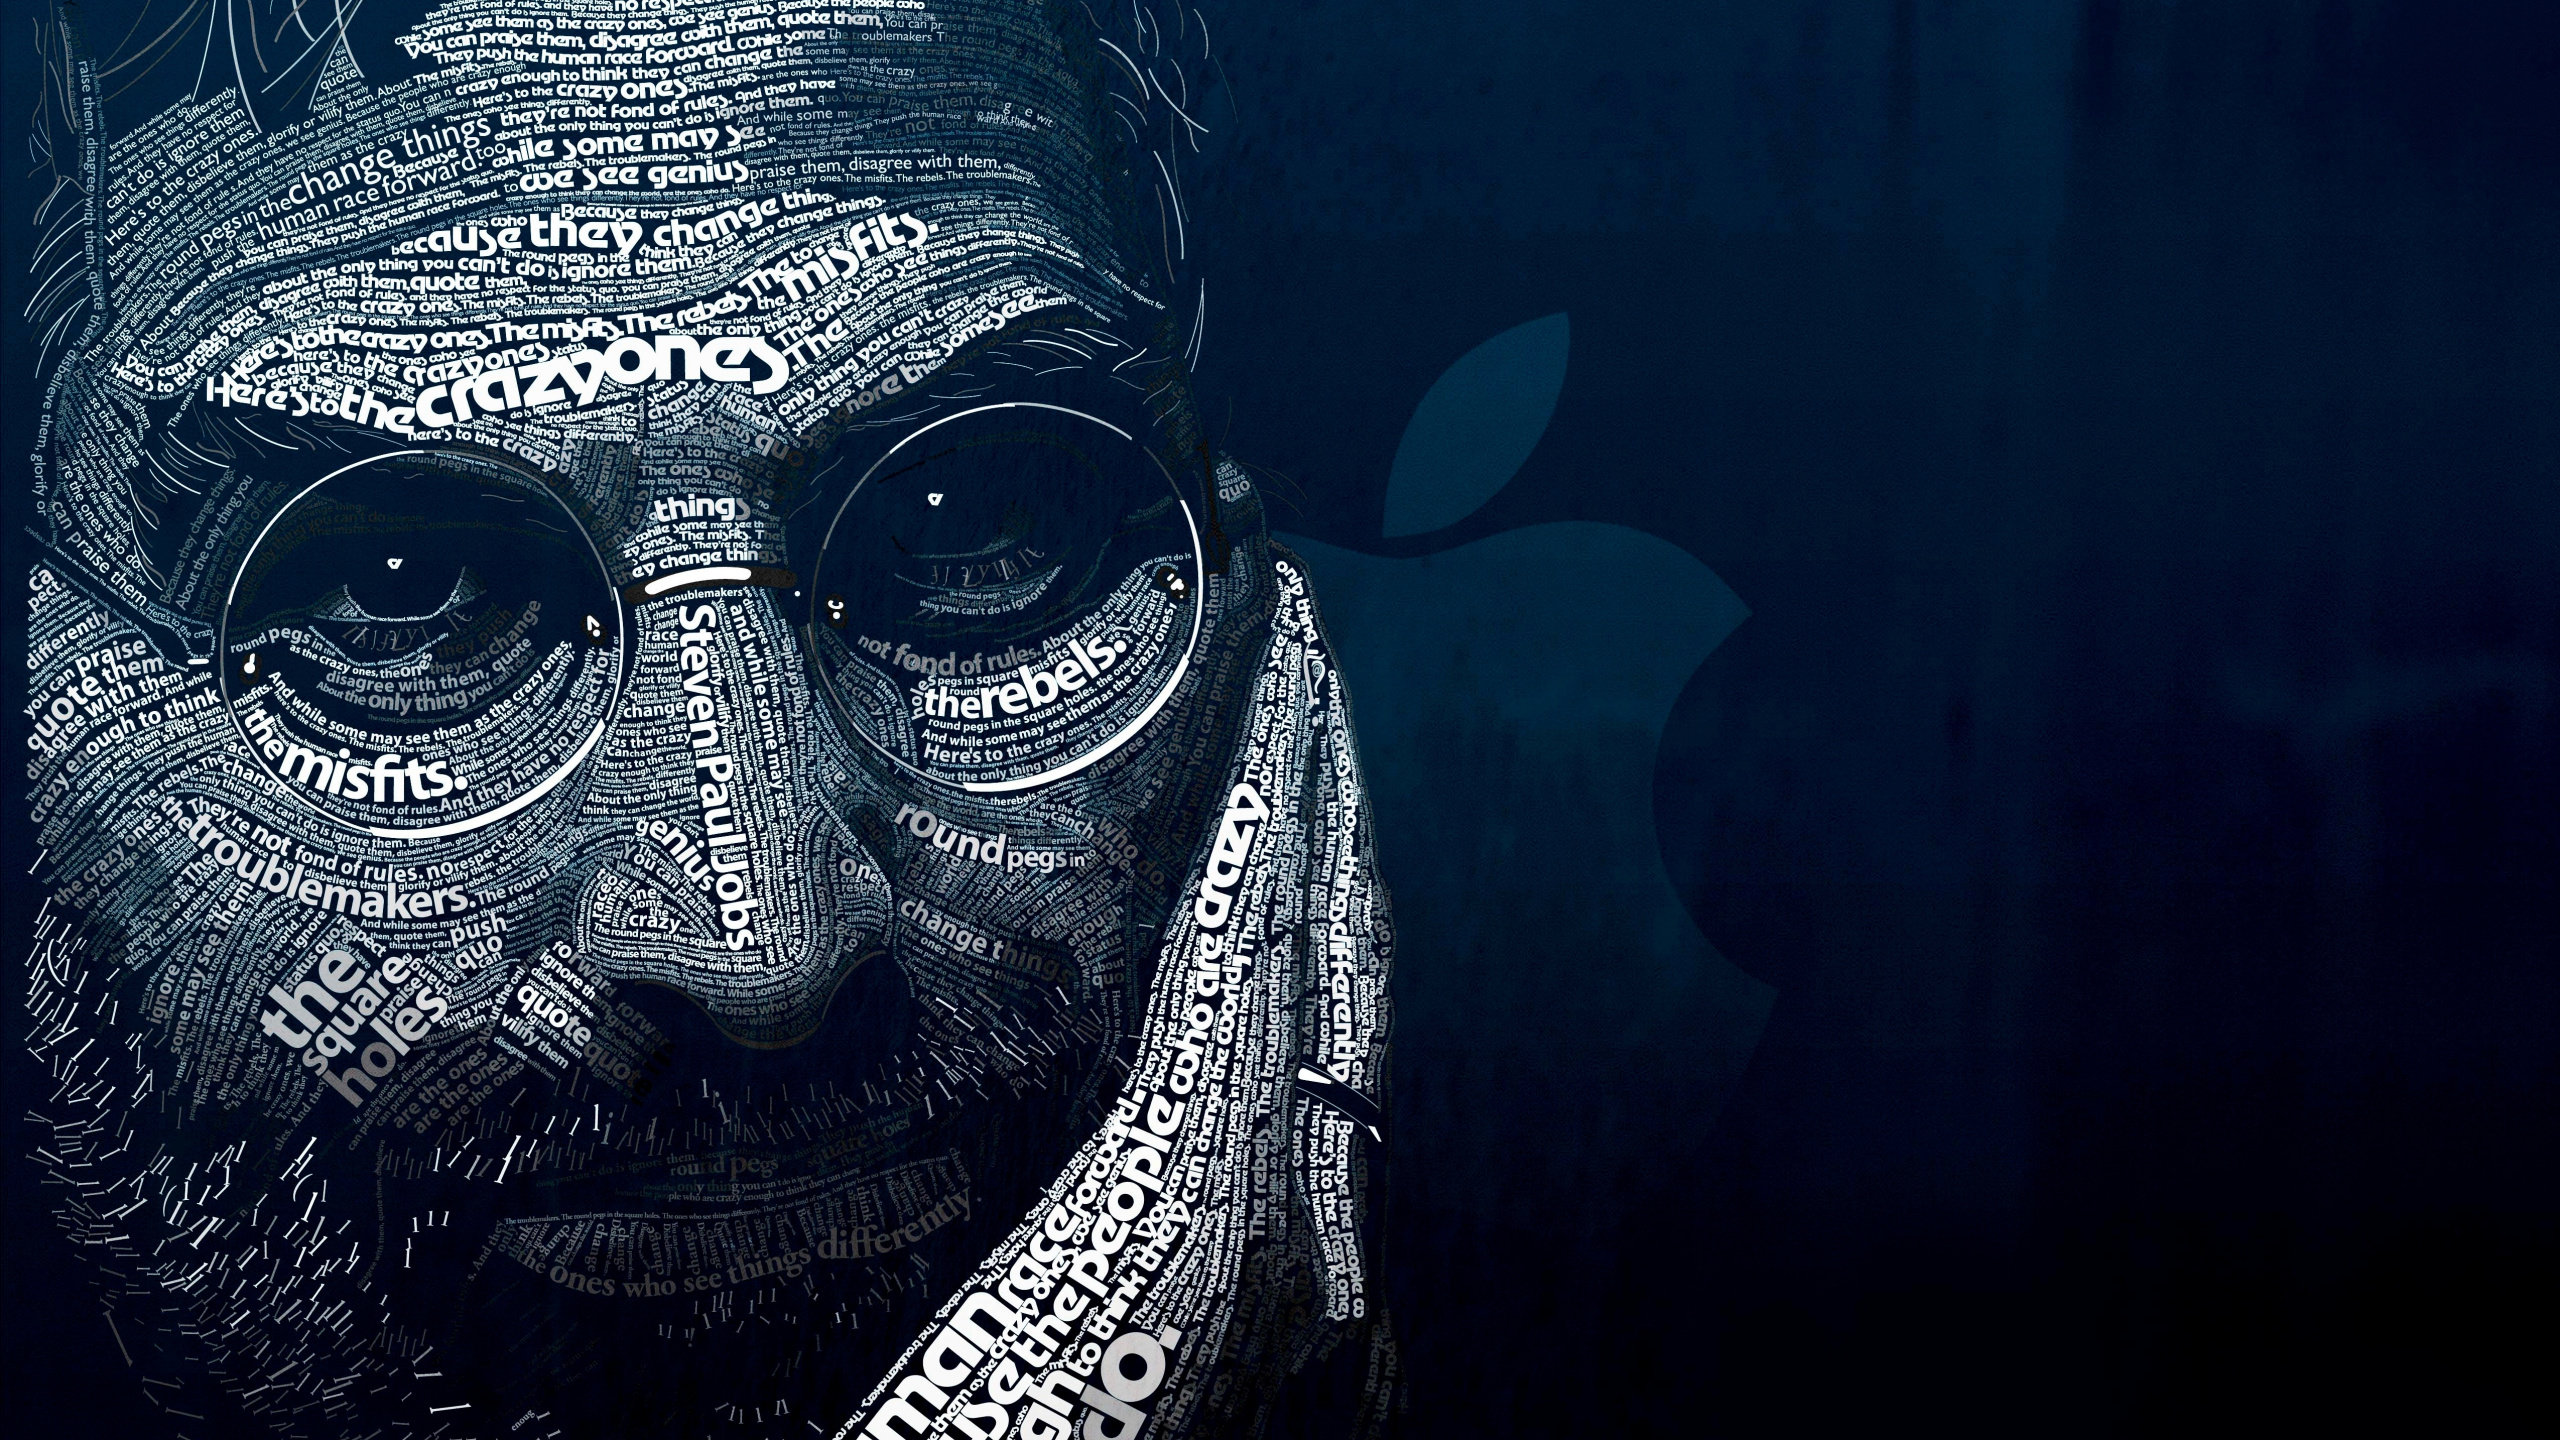 Steve Jobs, Obscurité, IPod, Masque, L'homme. Wallpaper in 2560x1440 Resolution